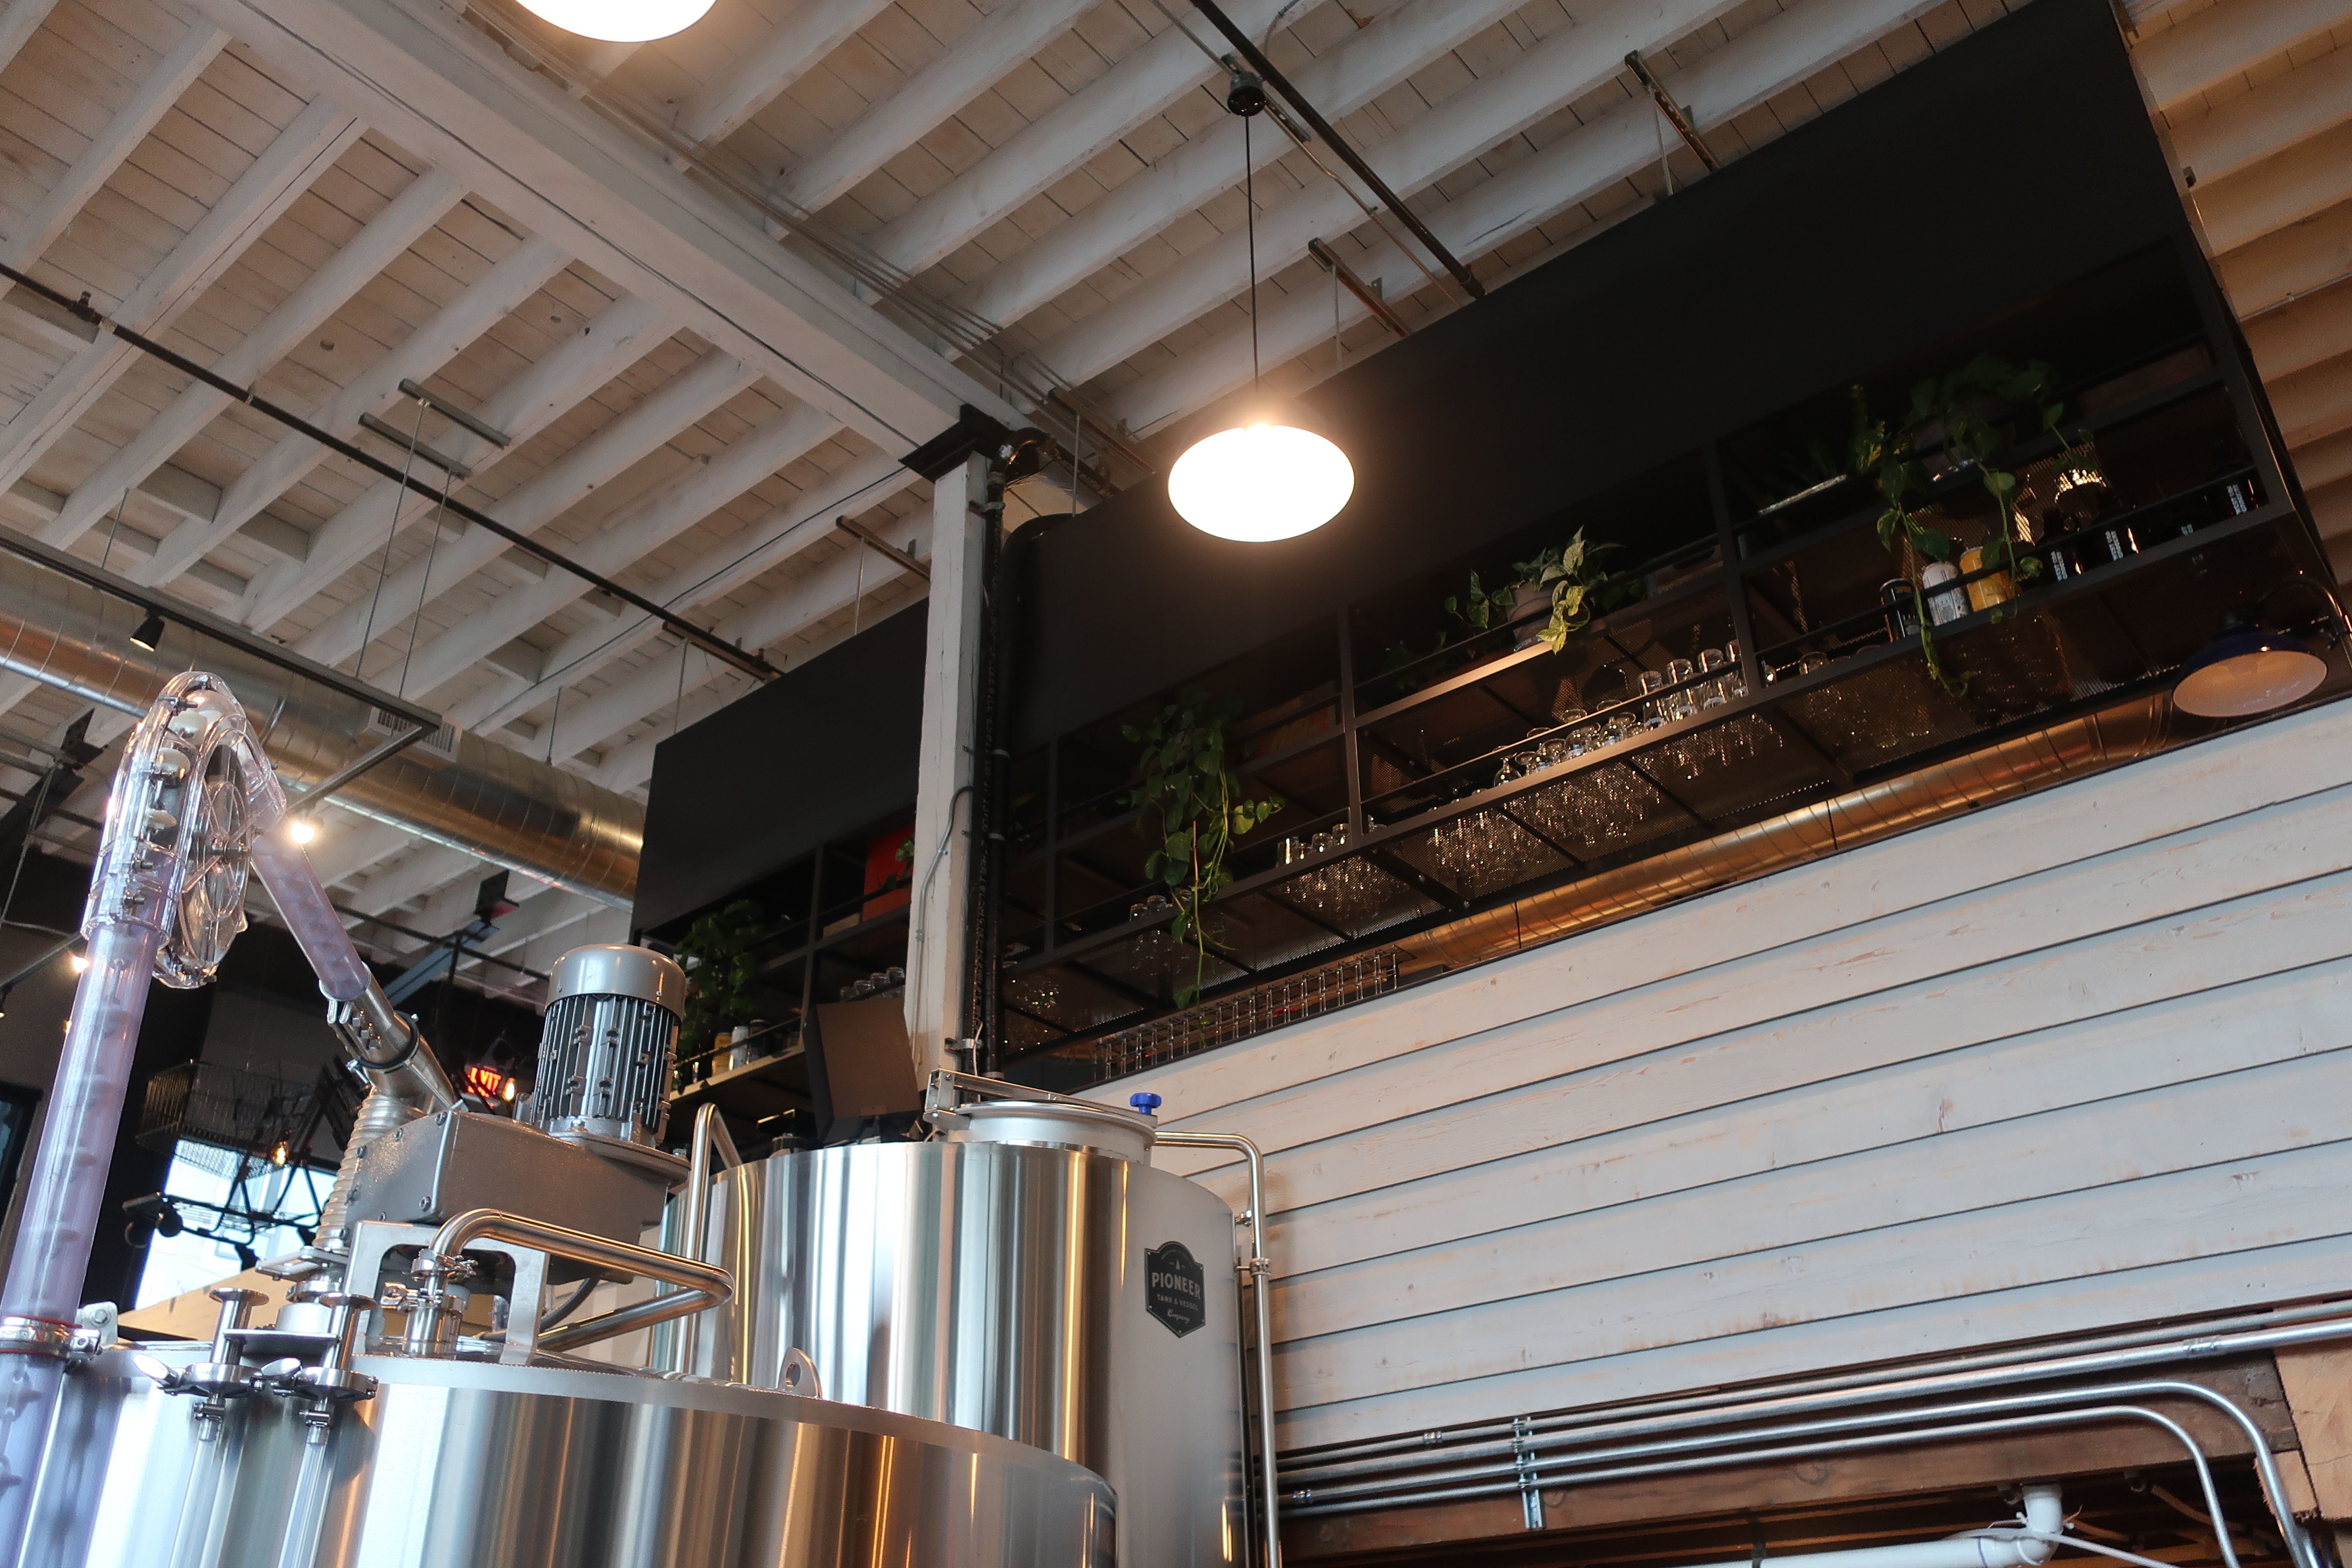 A look at the backside of the bar from the West Coast Grocery Co. brewery.